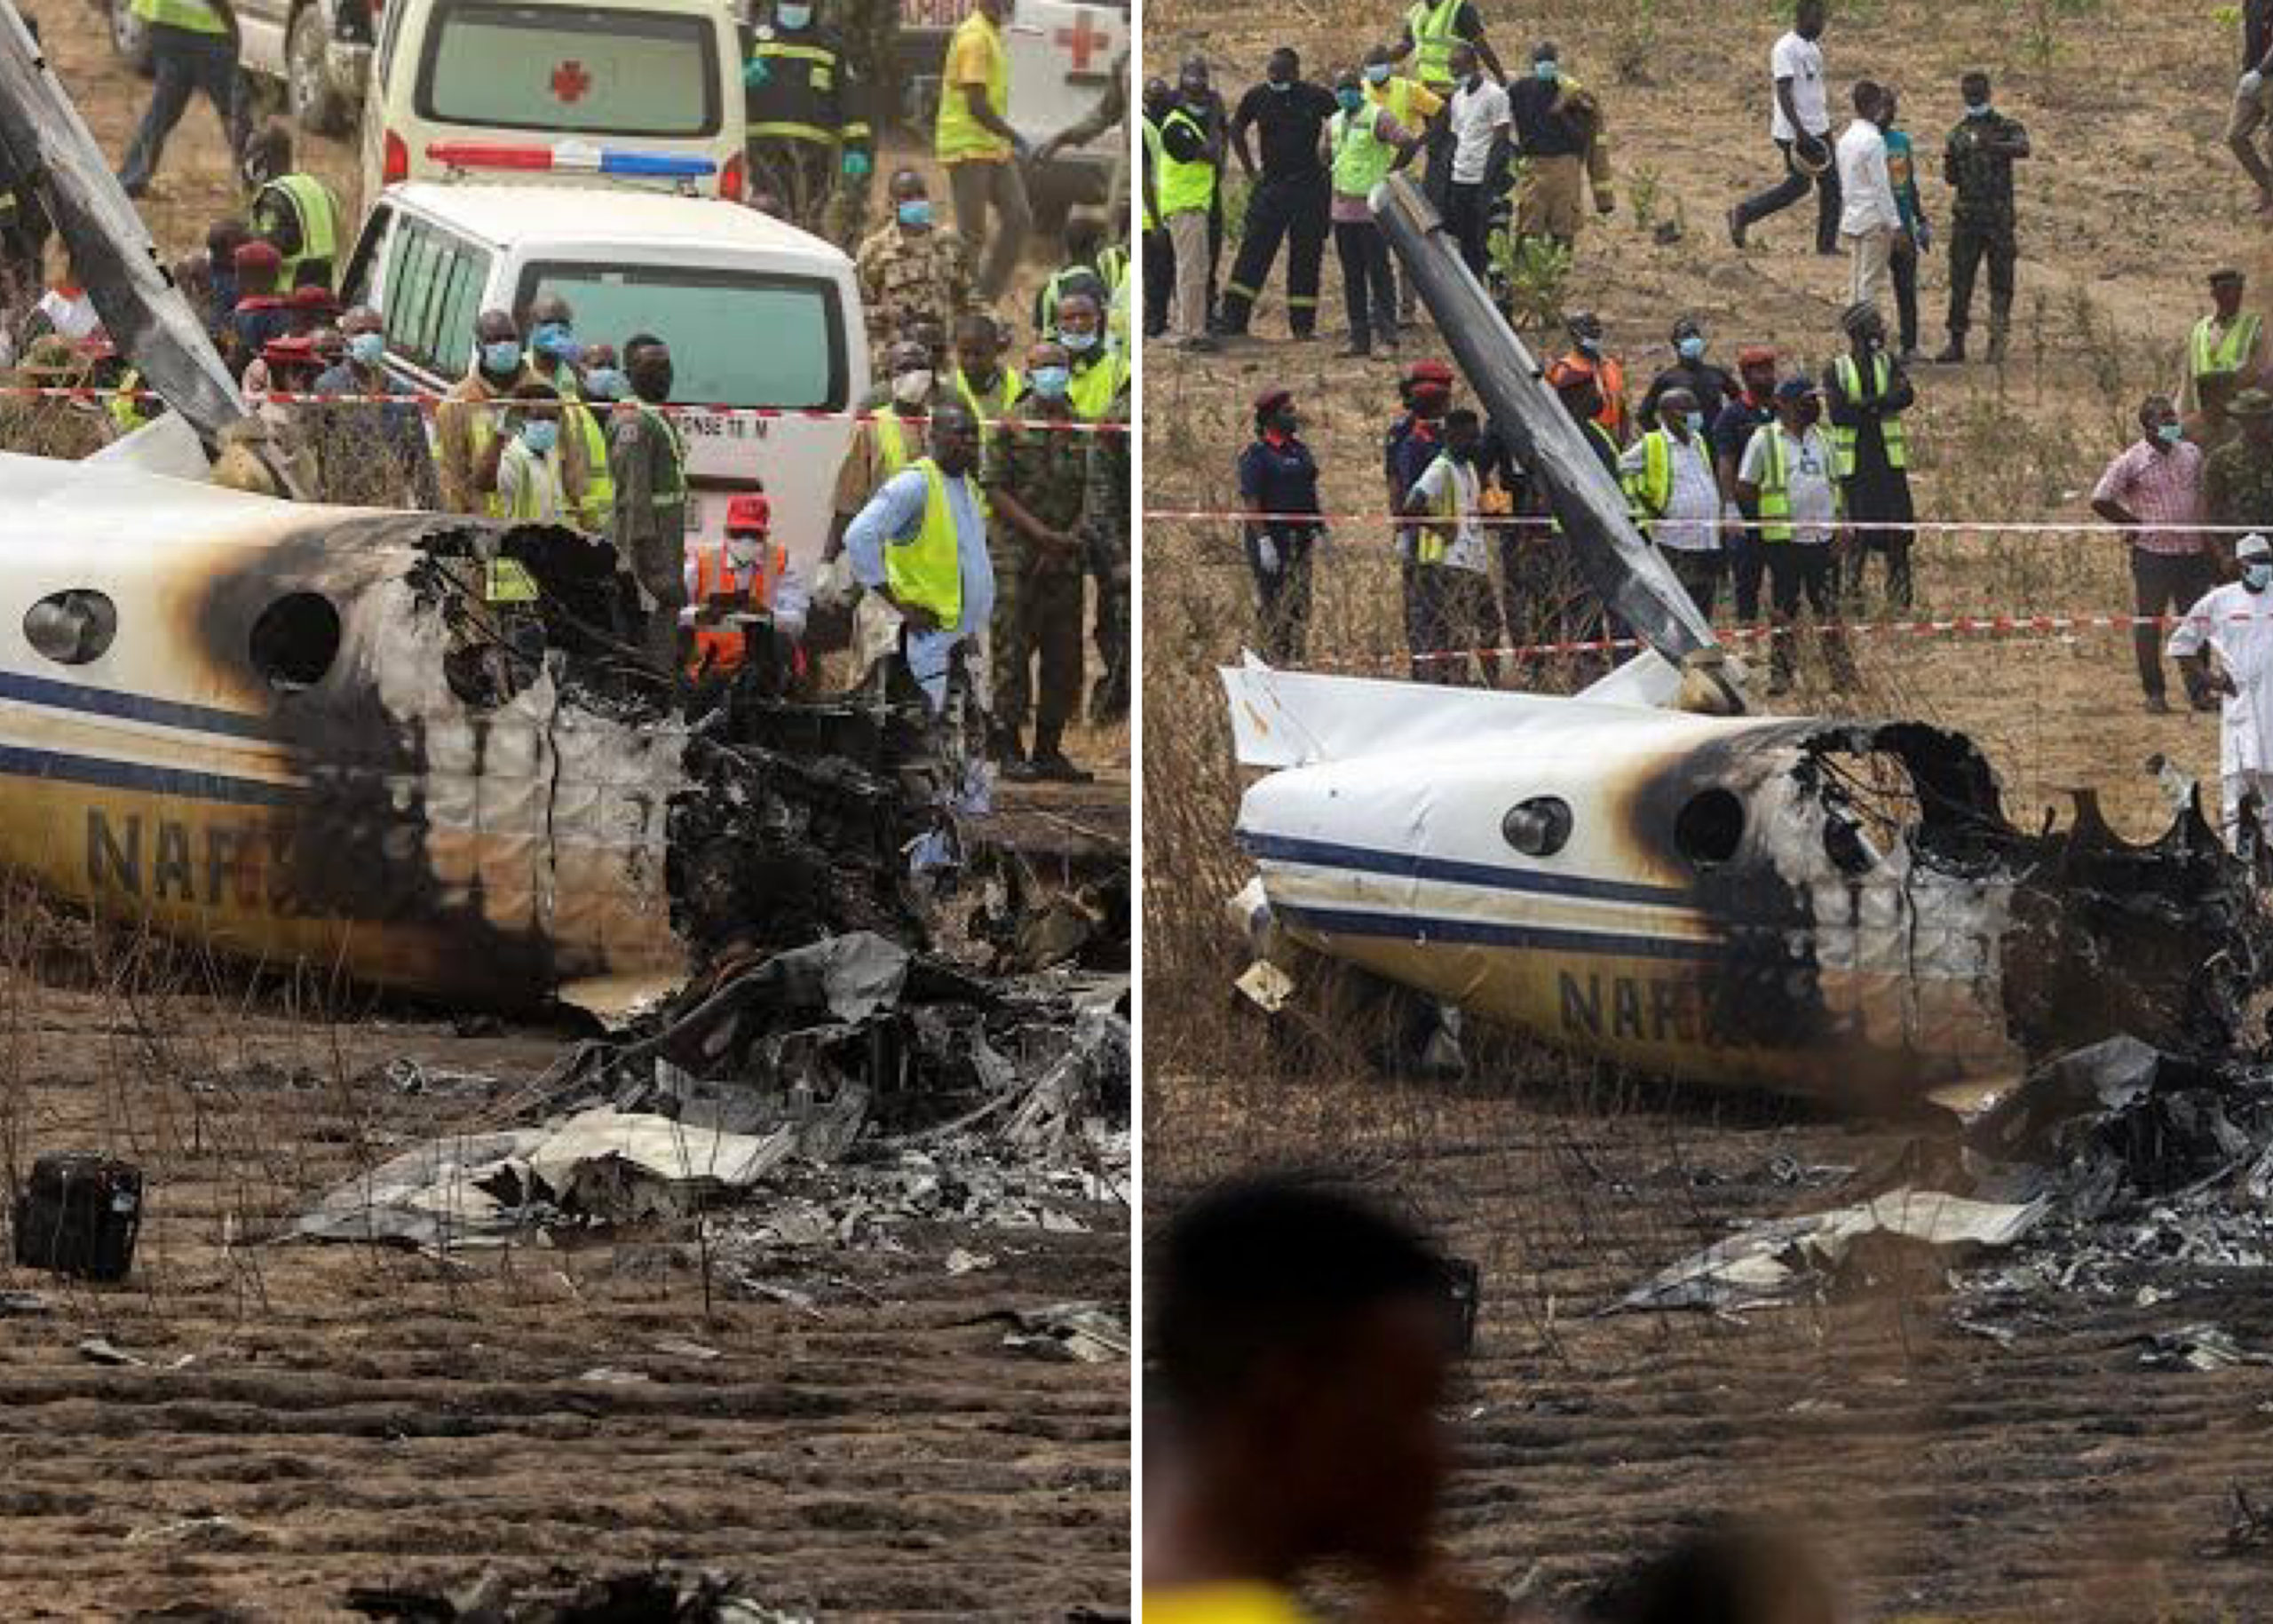 Abuja Plane Crash Victims To Be Buried On Thursday